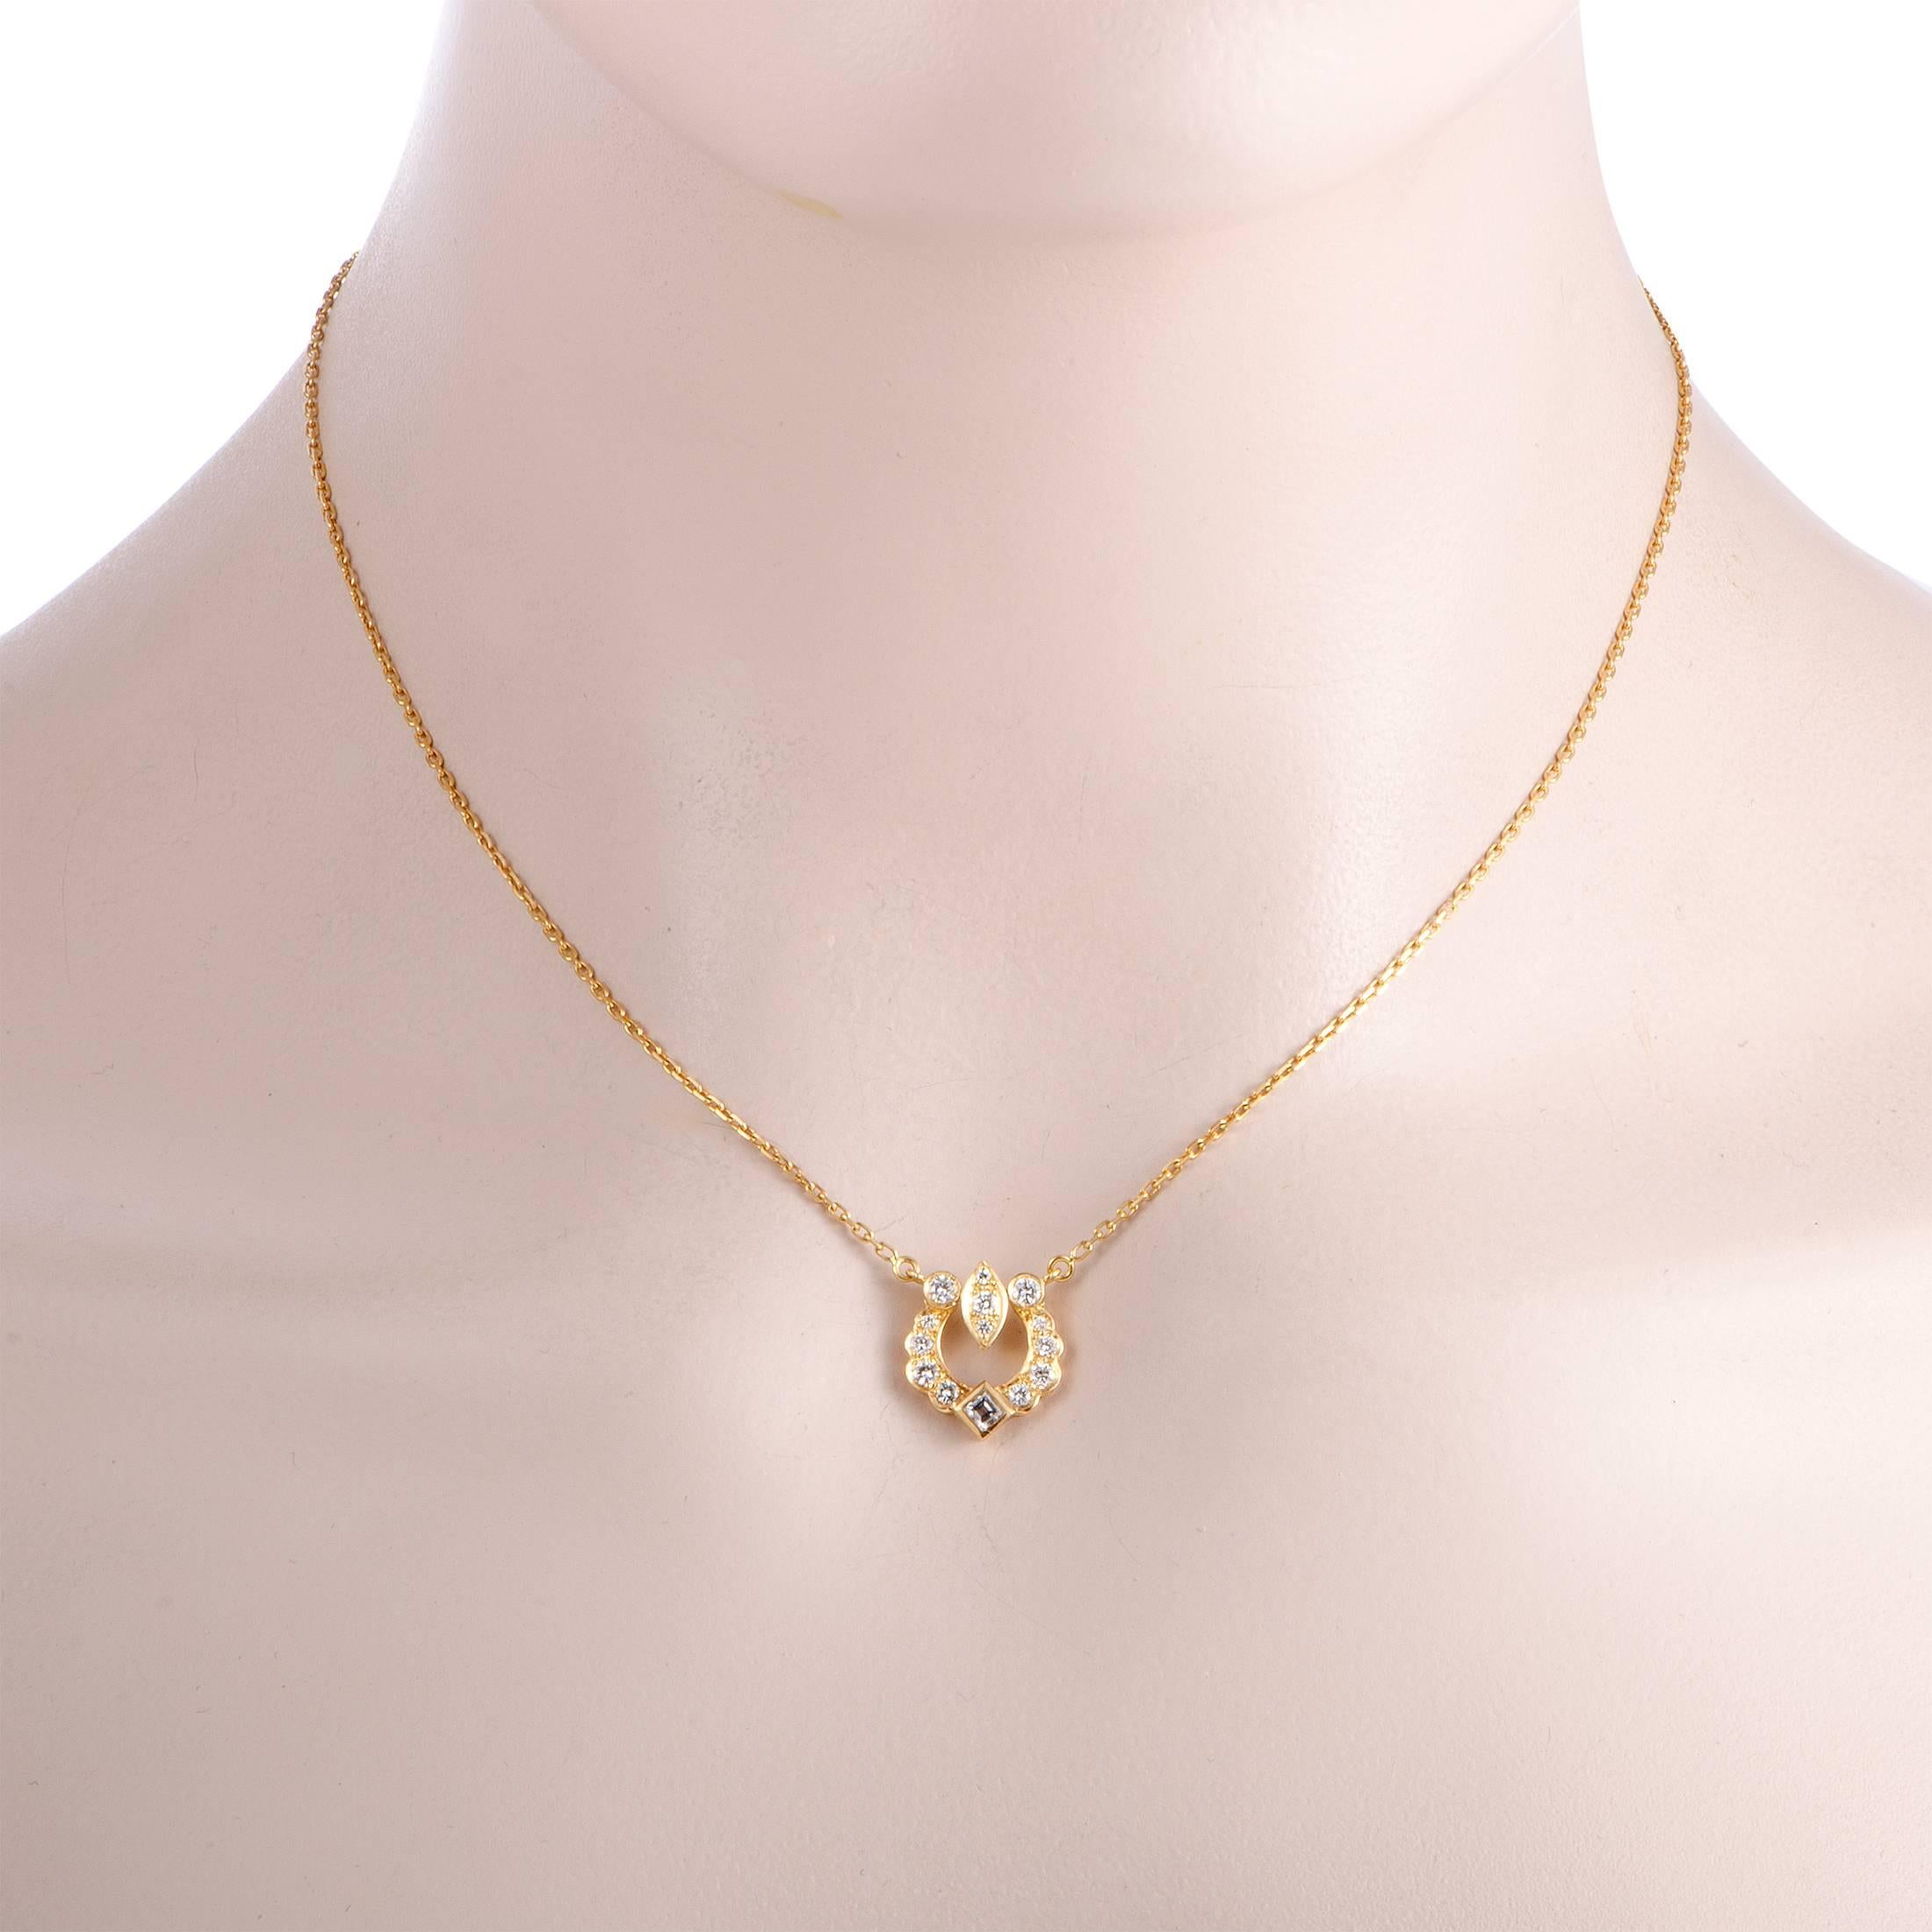 Cartier combined understated elegance with subtle diamond glisten in this vintage necklace that boasts an incredibly sophisticated appeal. The necklace is made of 18K yellow gold and boasts a total of approximately 0.65 carats of diamonds.
Included